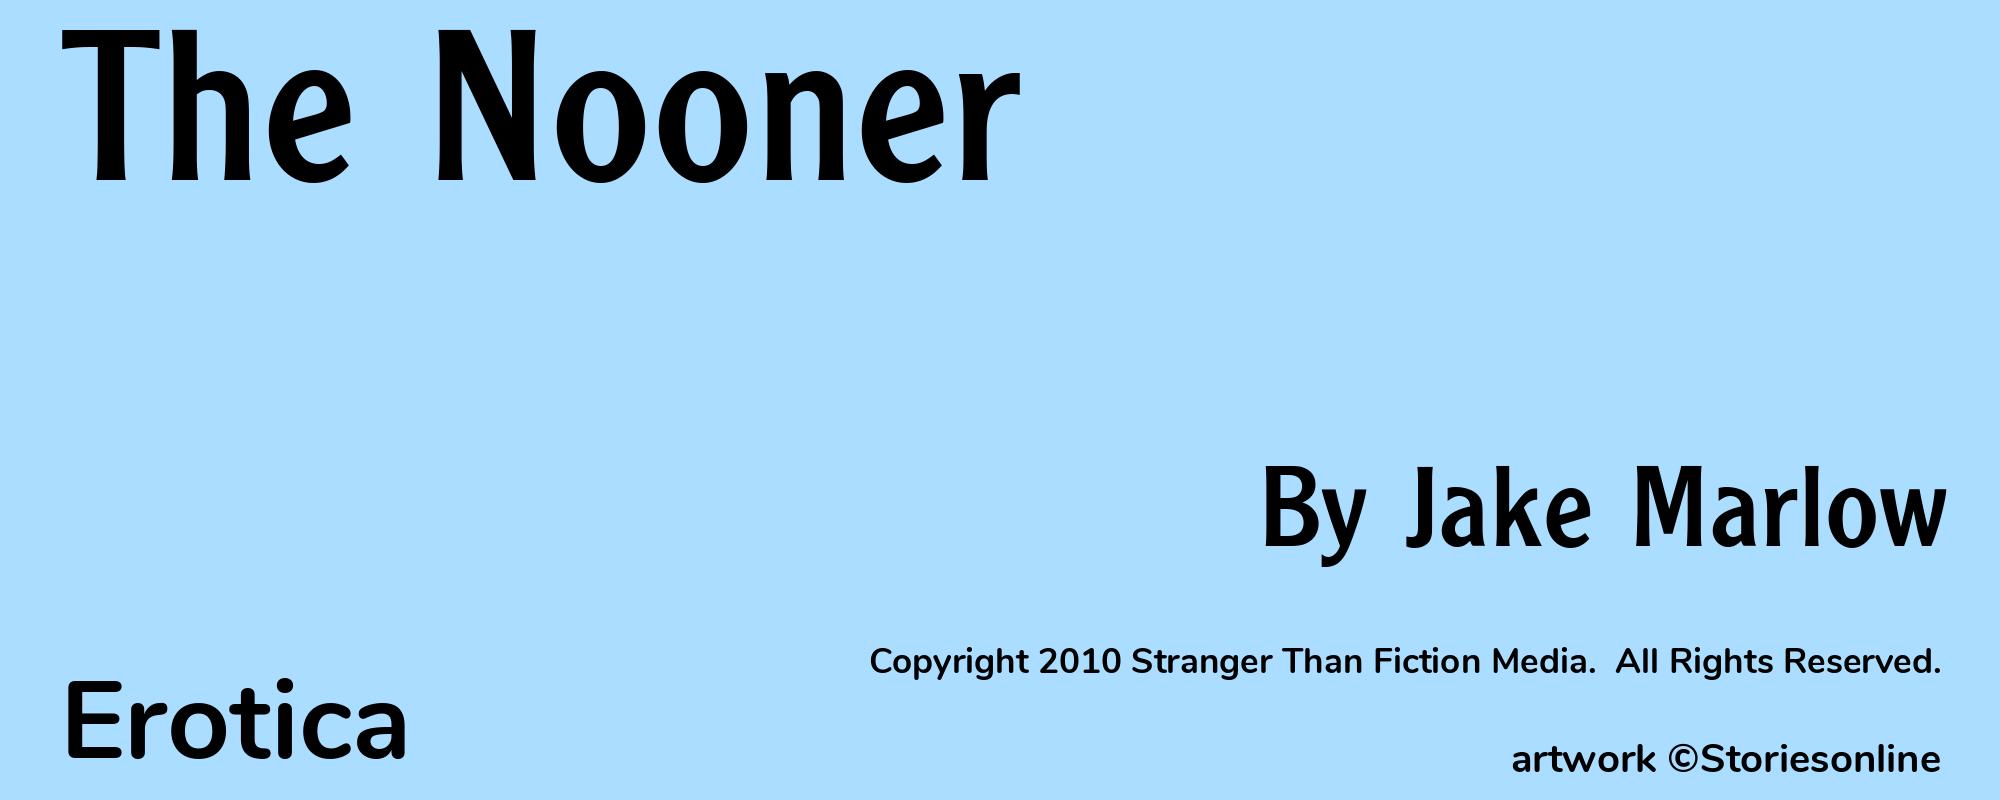 The Nooner - Cover